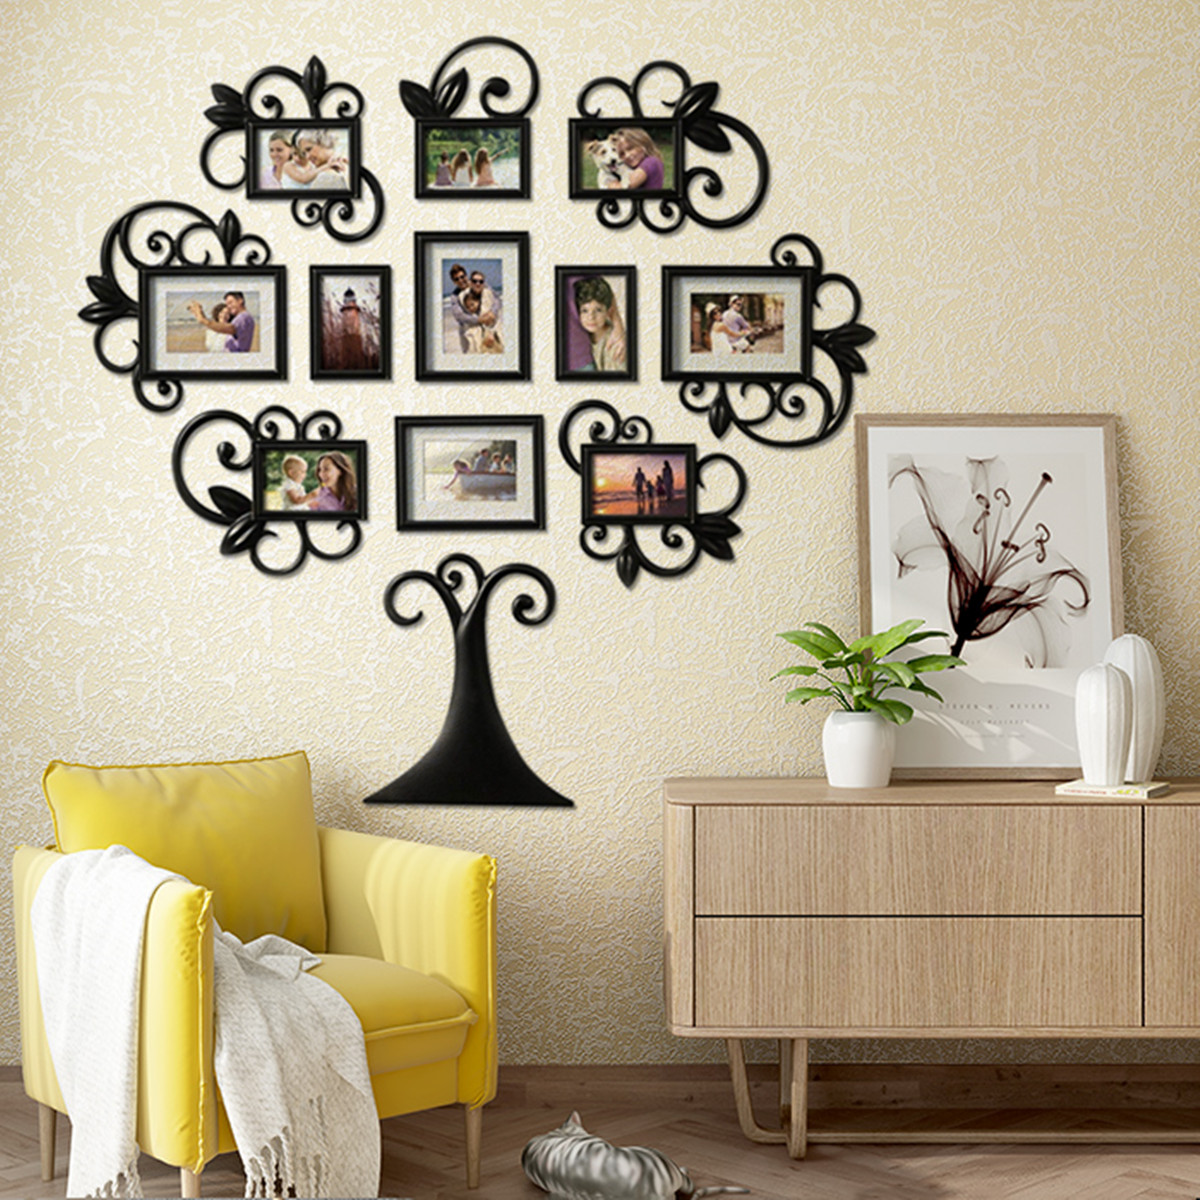 3D-Family-Tree-Photo-Picture-Frame-Collage-Wall-Stickers-Art-Home-Decor-1725864-8